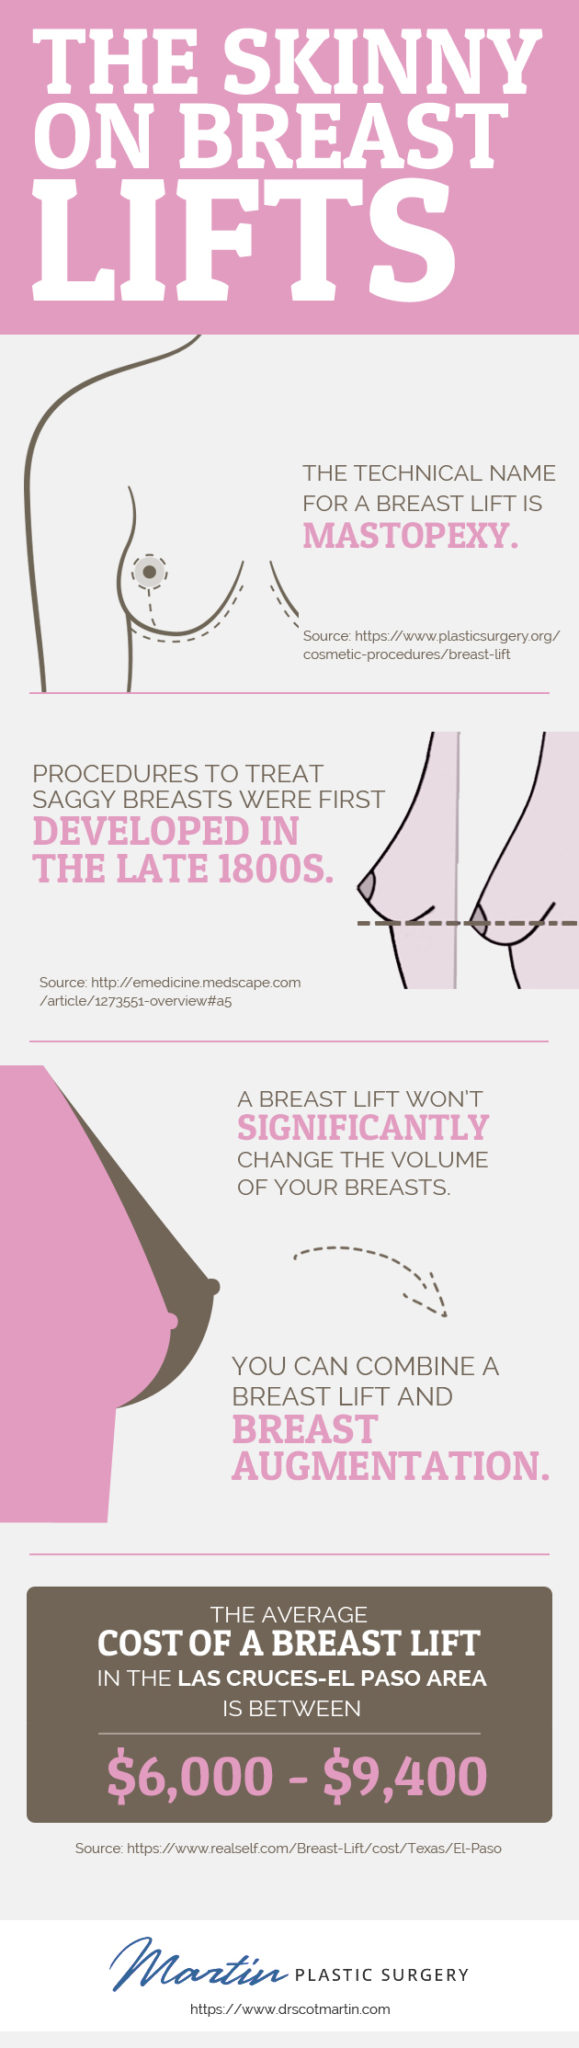 The Skinny on Breast Lifts